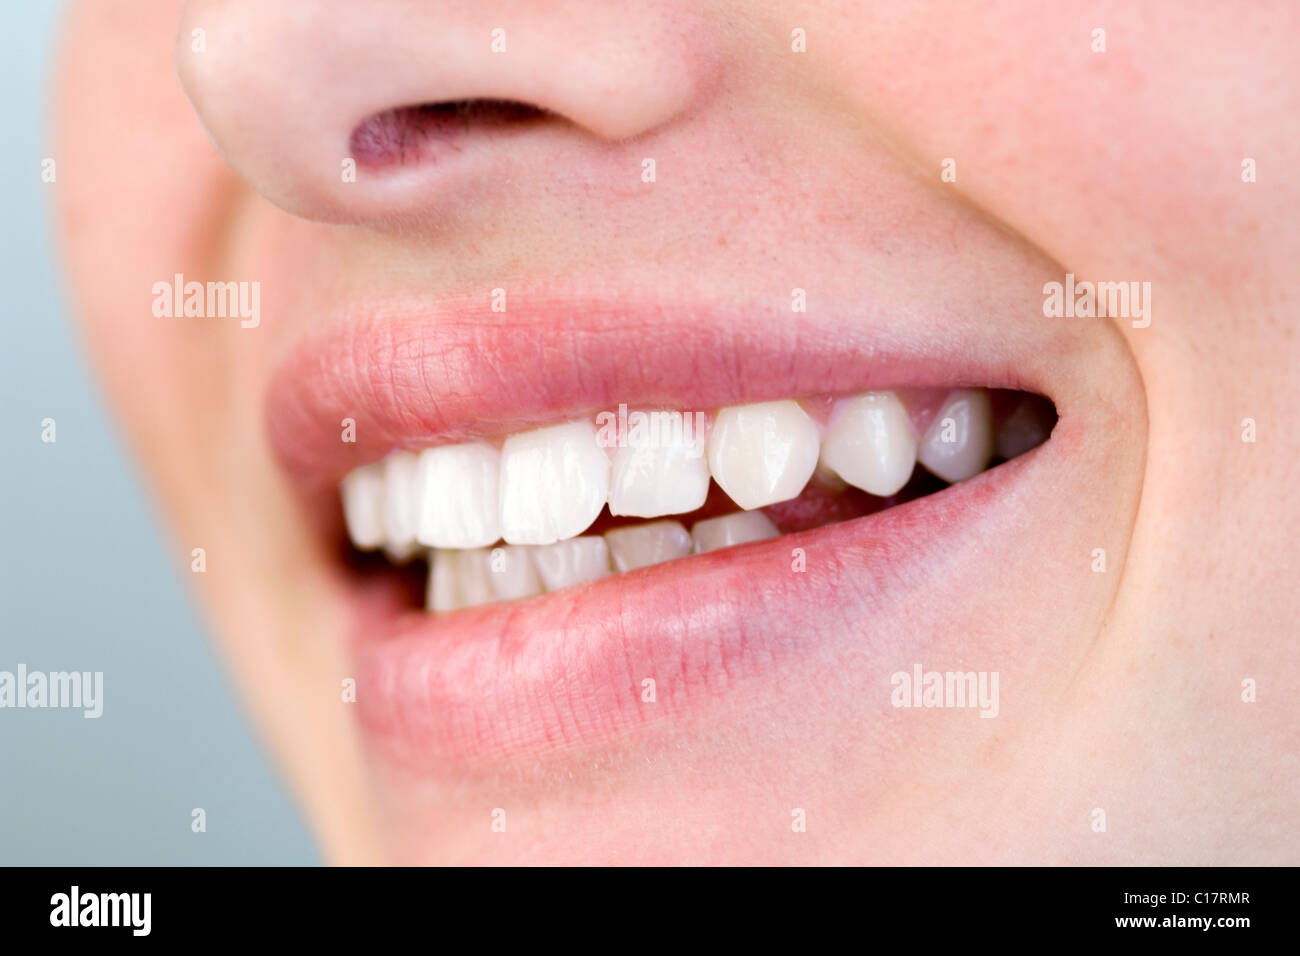 Mouth of a boy, laughing Stock Photo